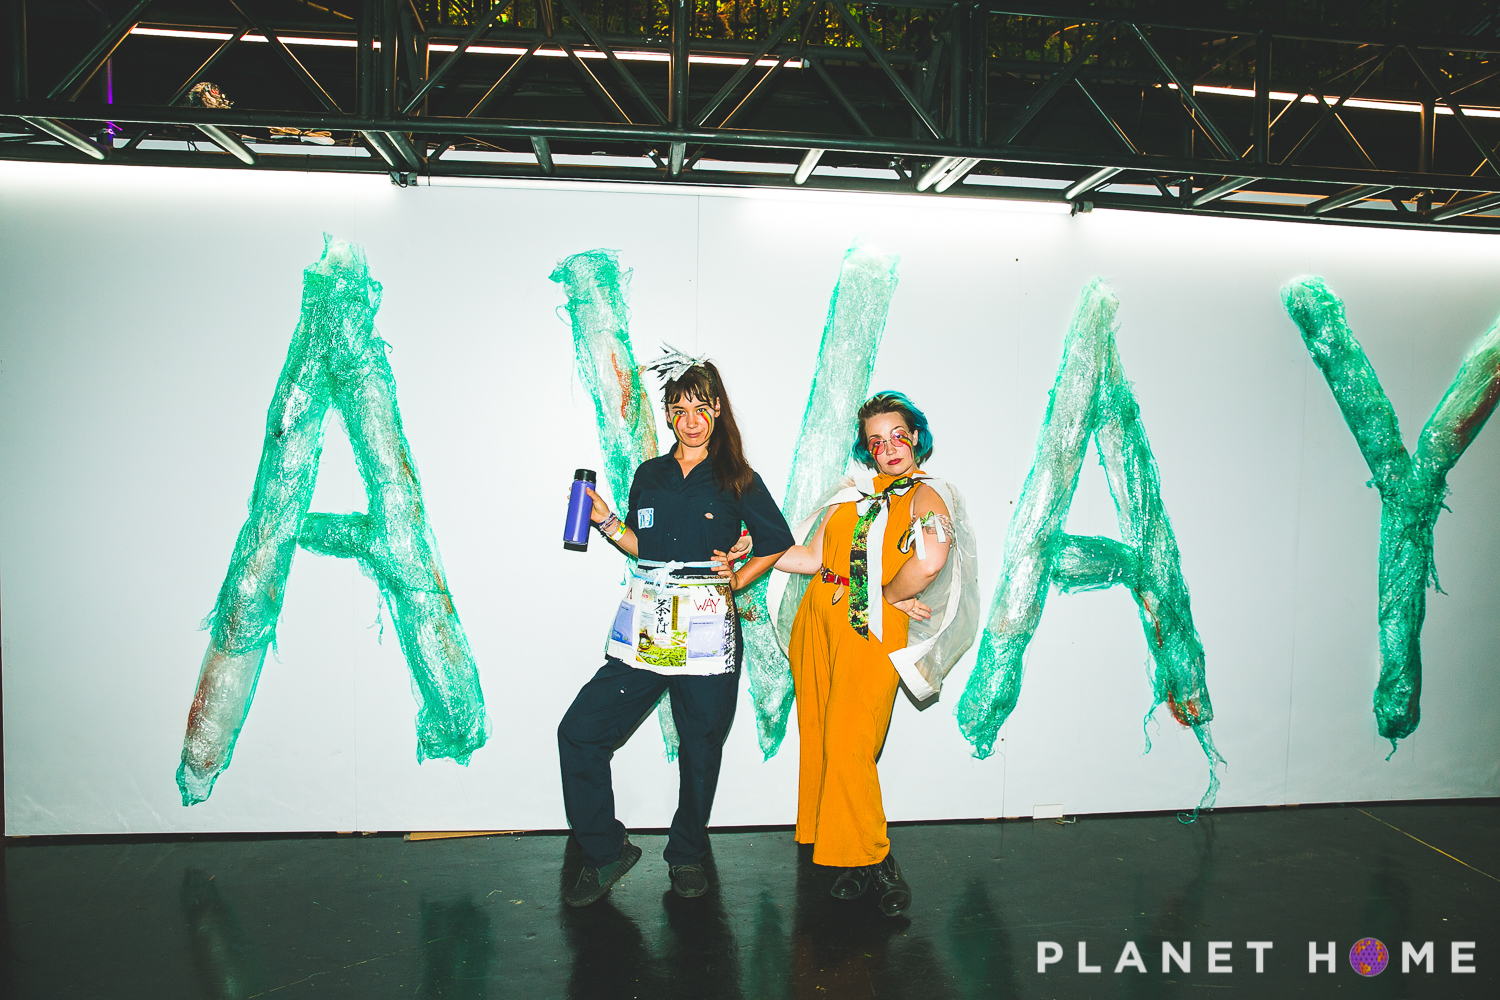 AWAY plastic exhibit at Planet Home 2019 event